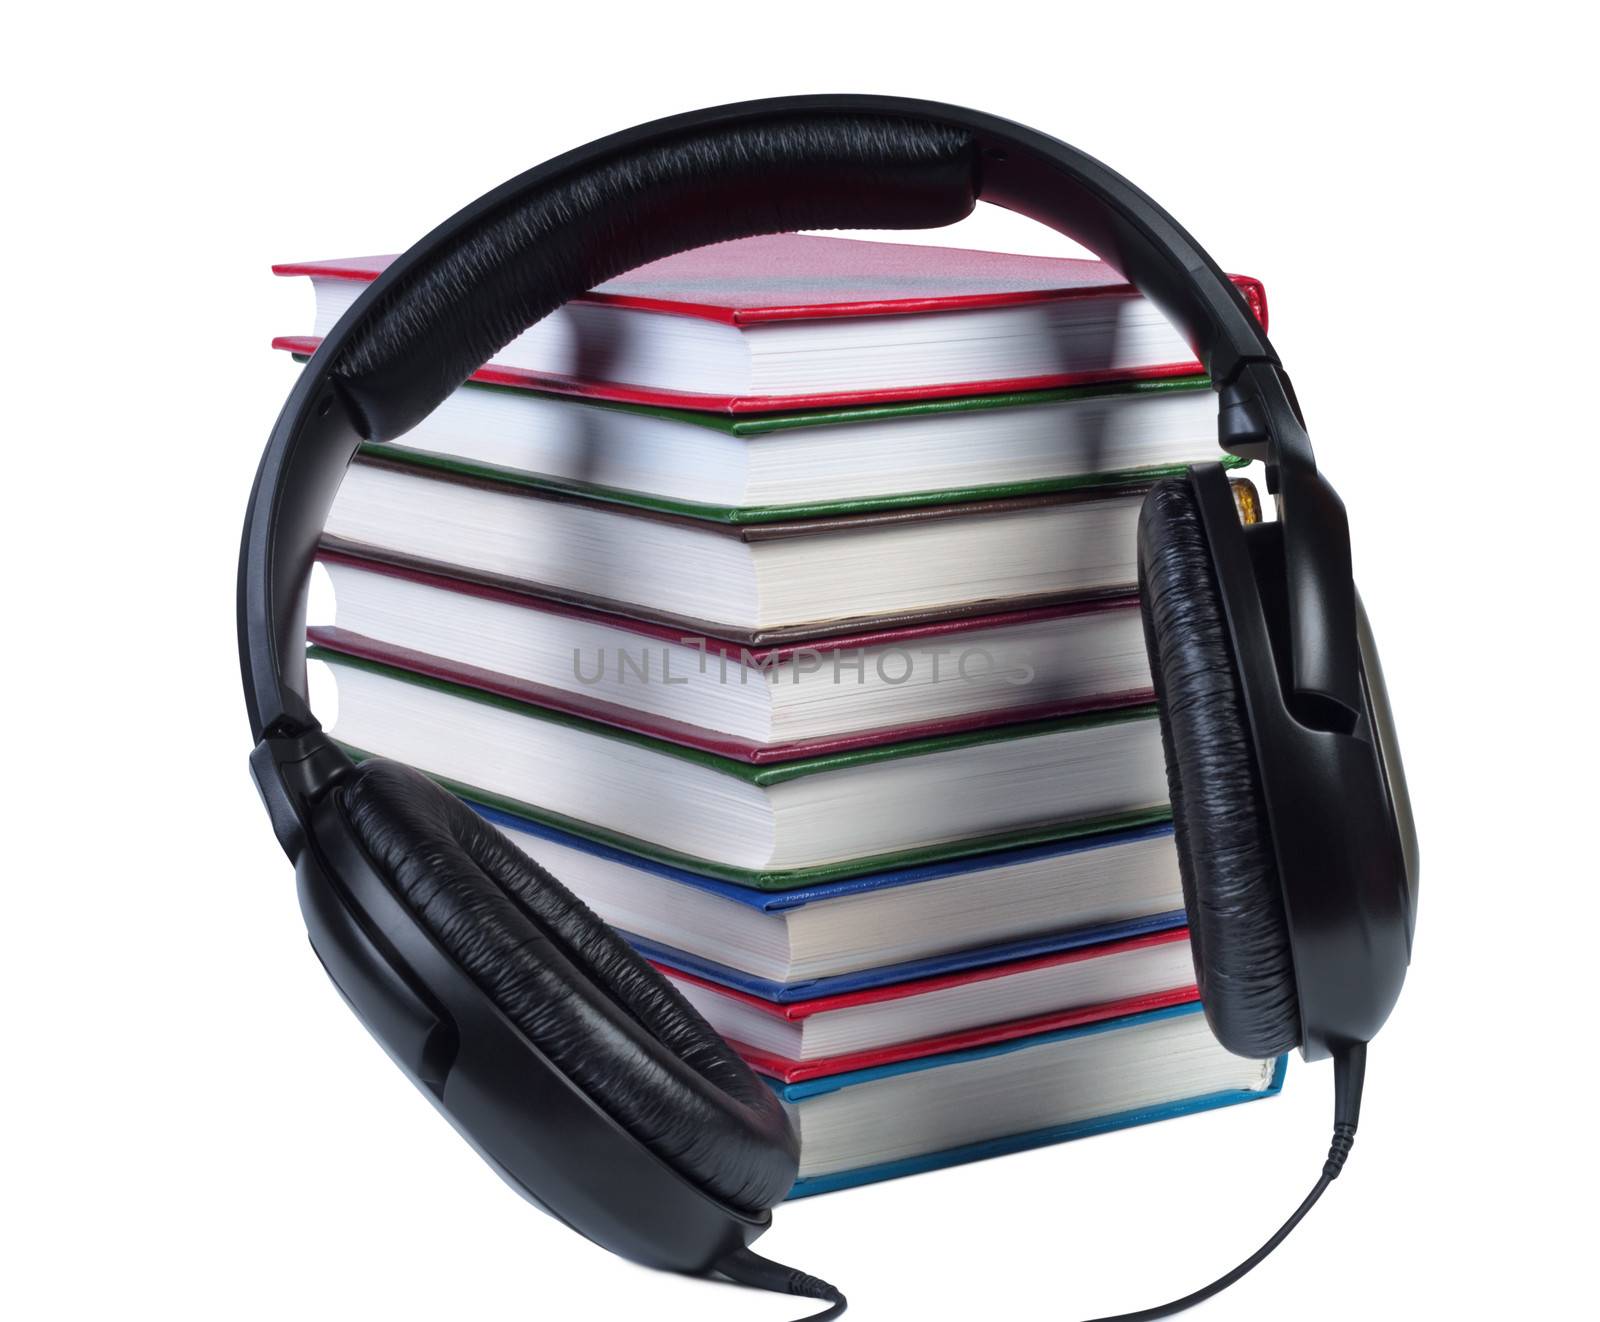 Audio headphones on a pile of books with color covers. Objects isolated white background.